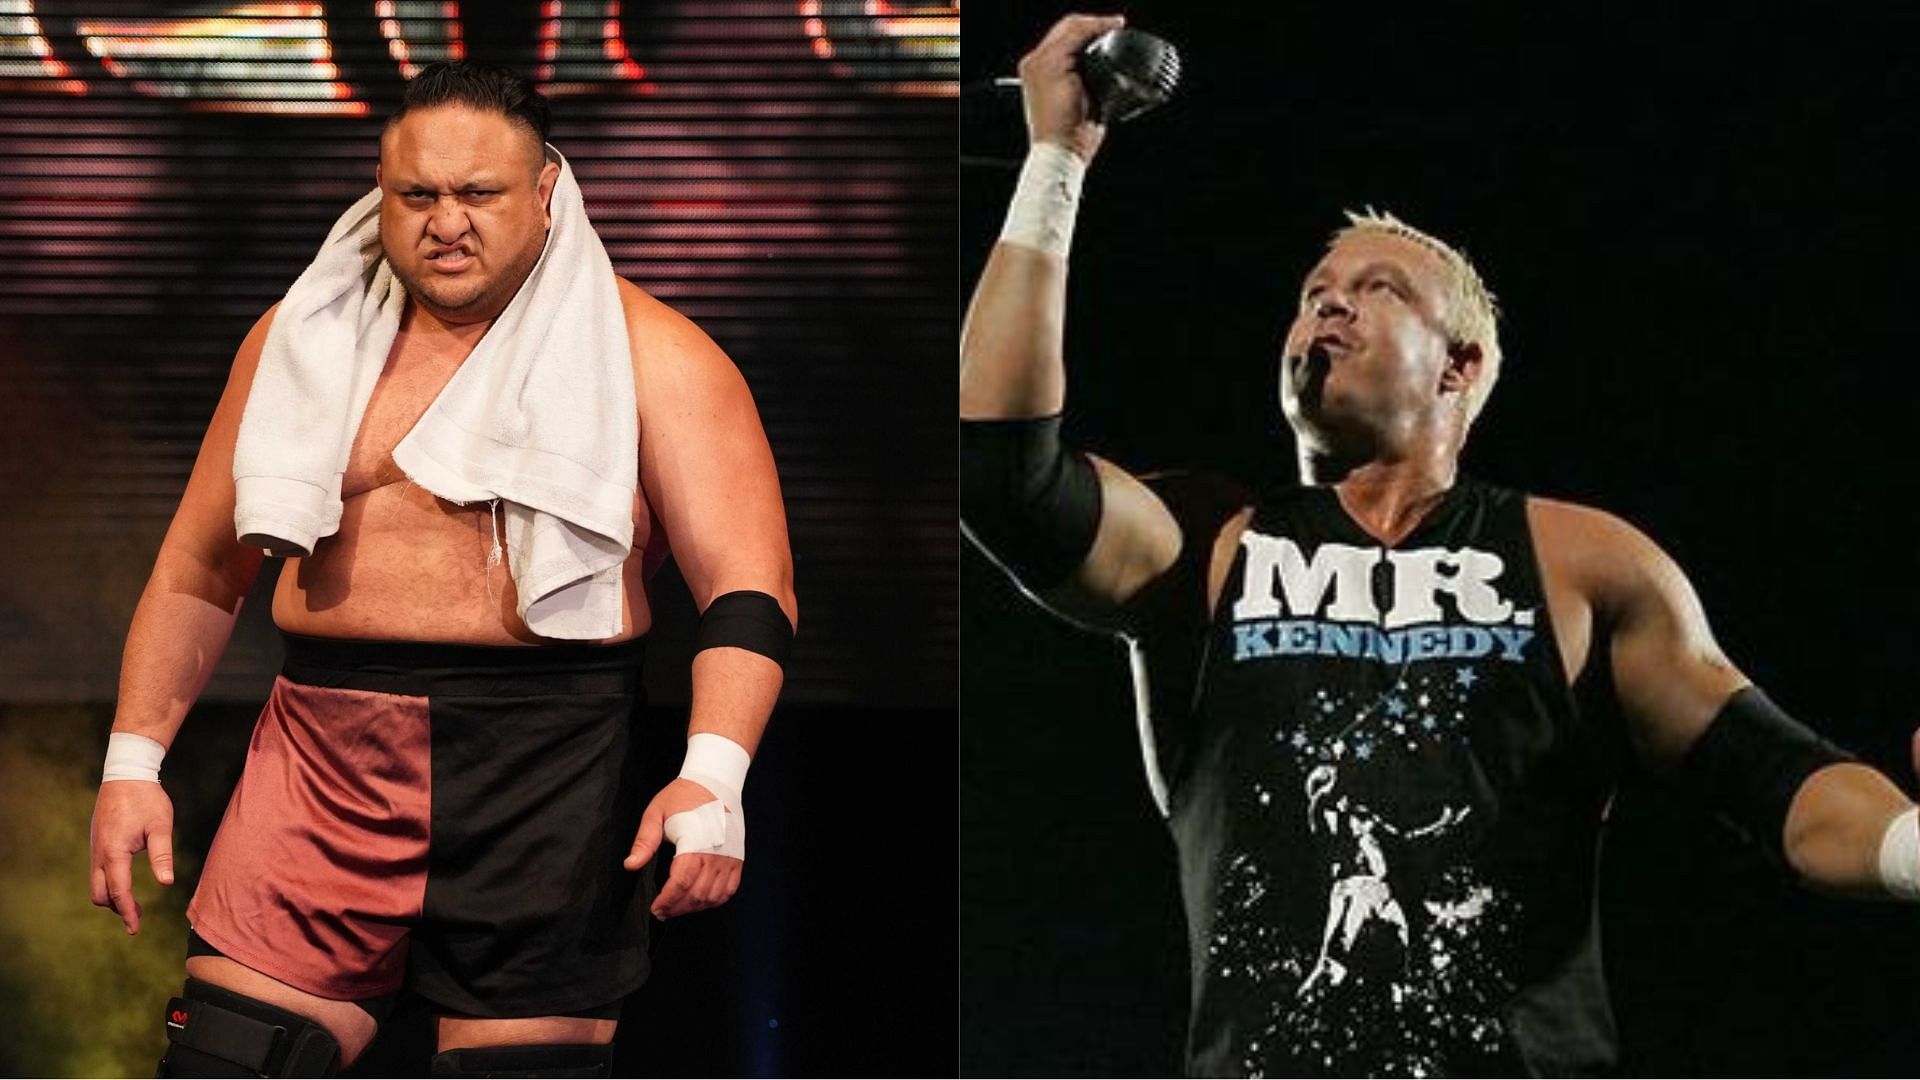 Samoa Joe and Mr. Kennedy are just two main event level talents that WWE dropped the ball with